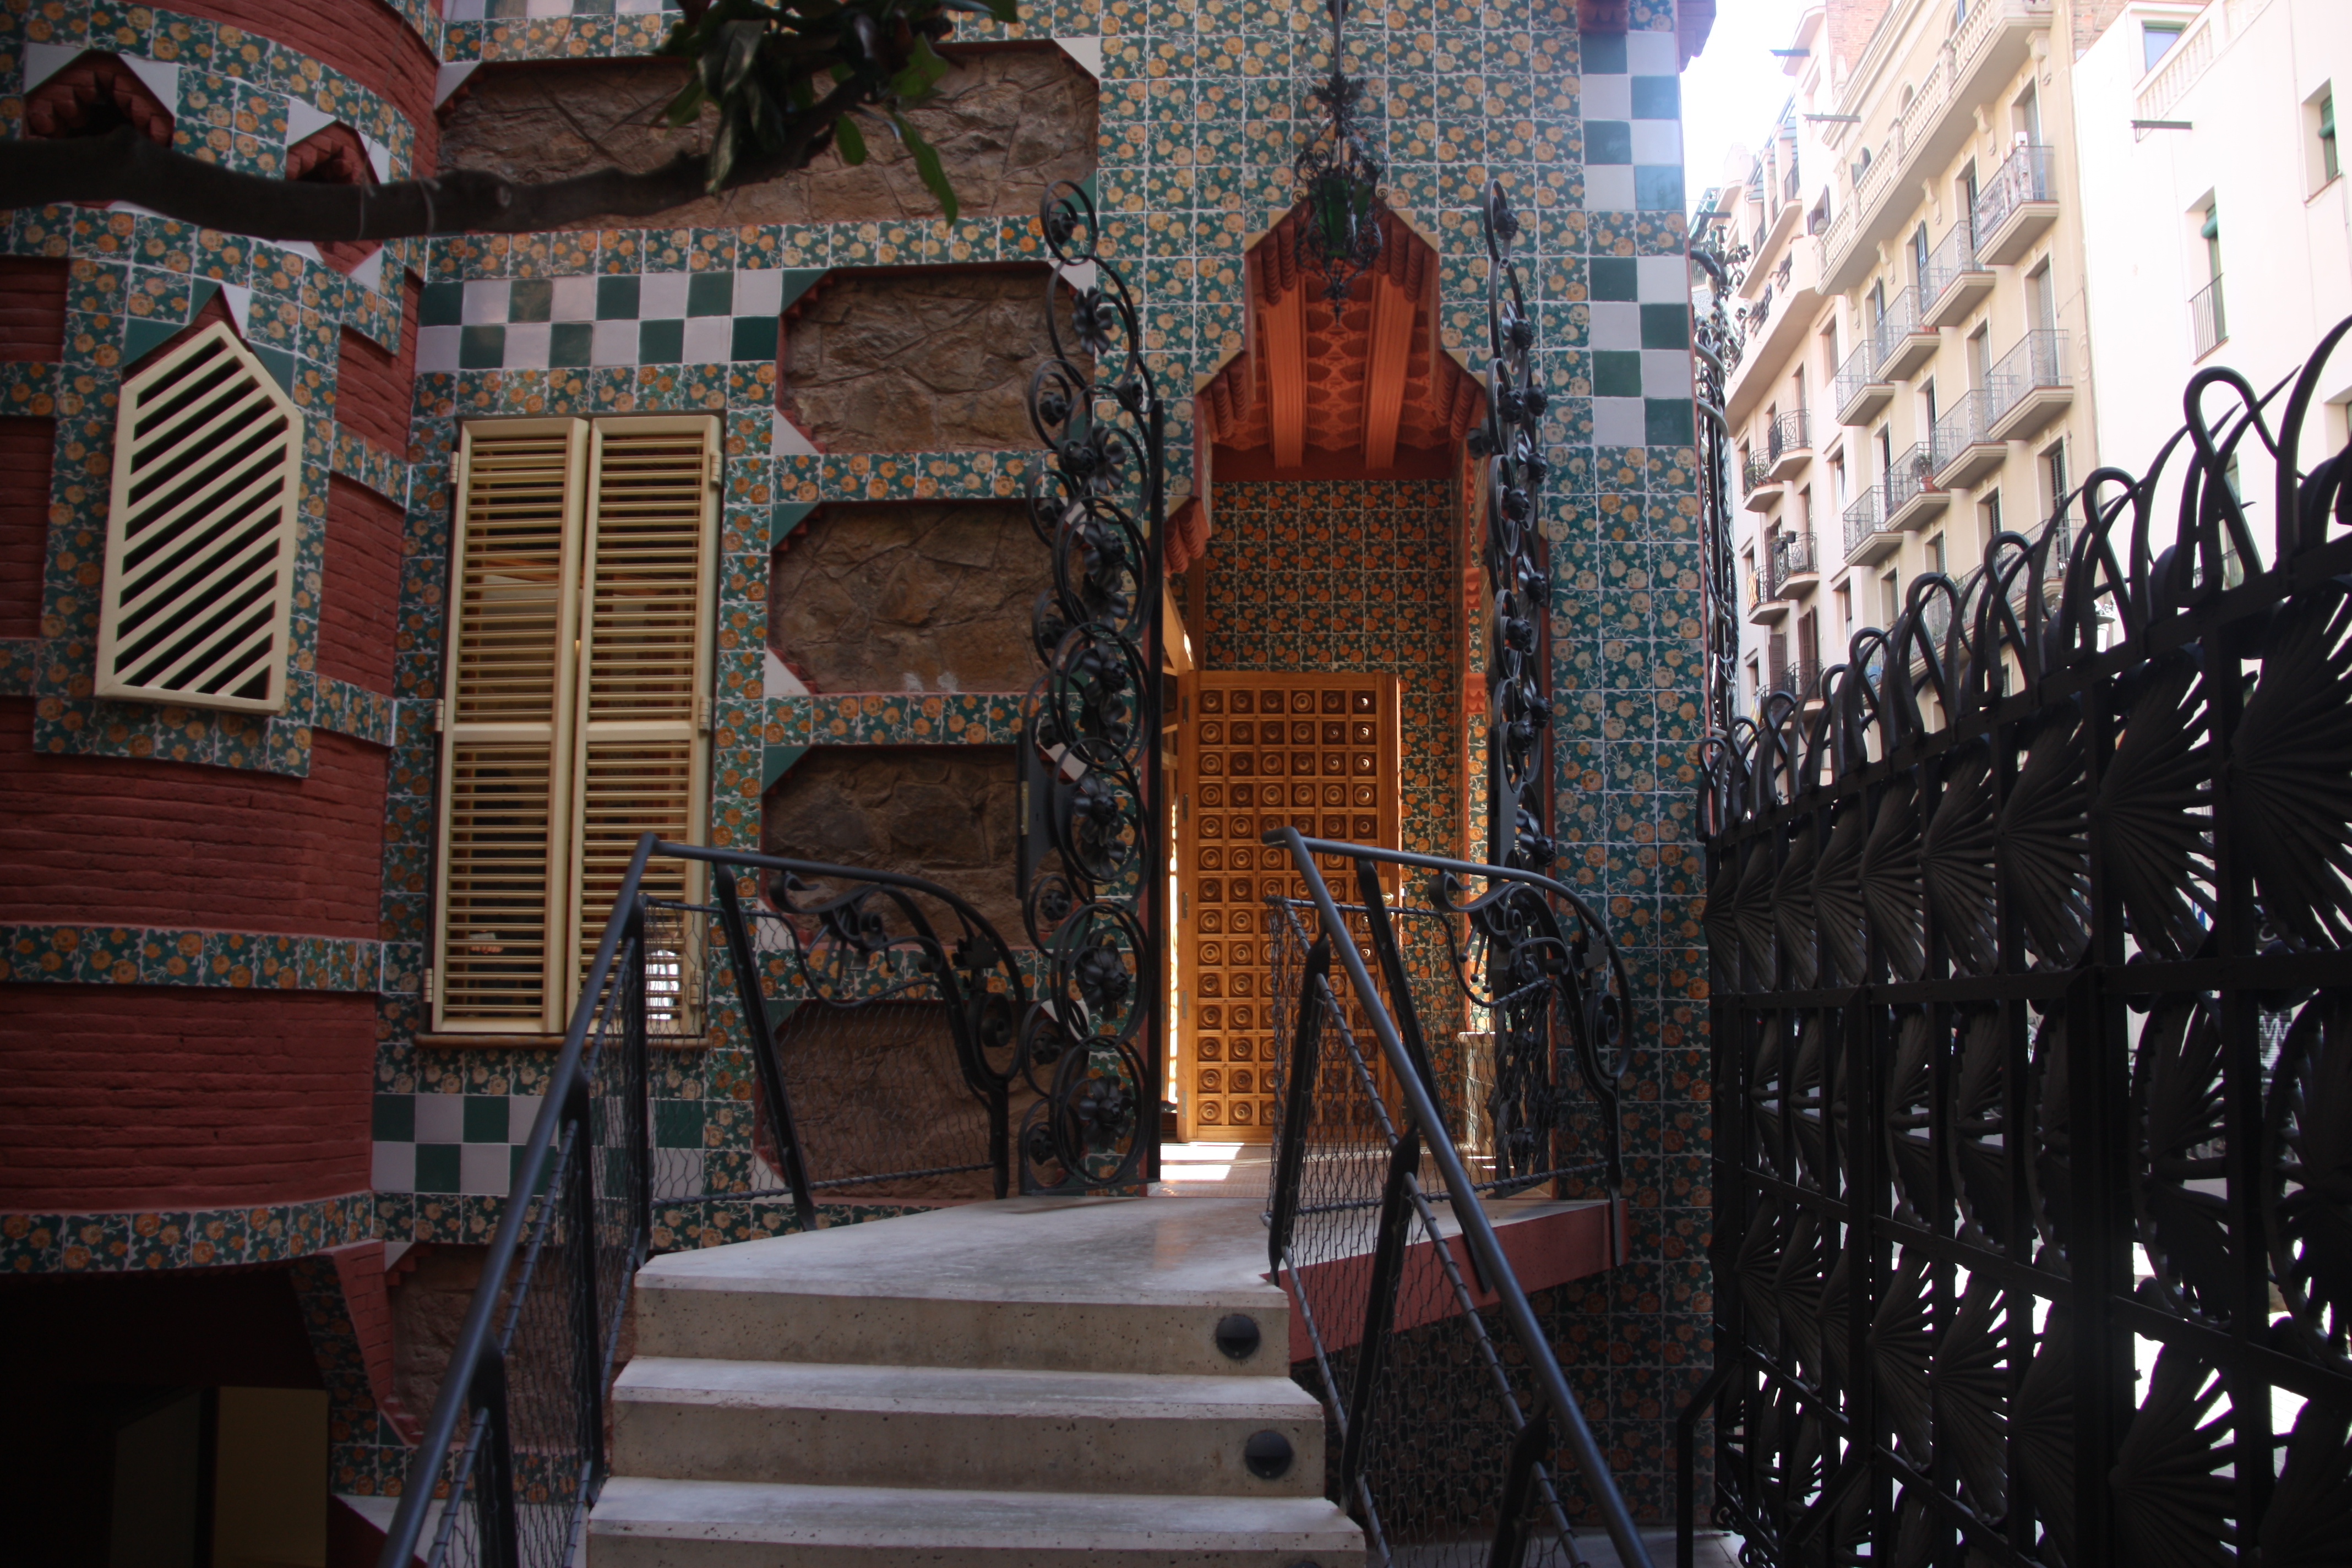 An entrance to Gaudì's Casa Vicens in Barcelona on October 30 2017 (by Andreu Rubert)